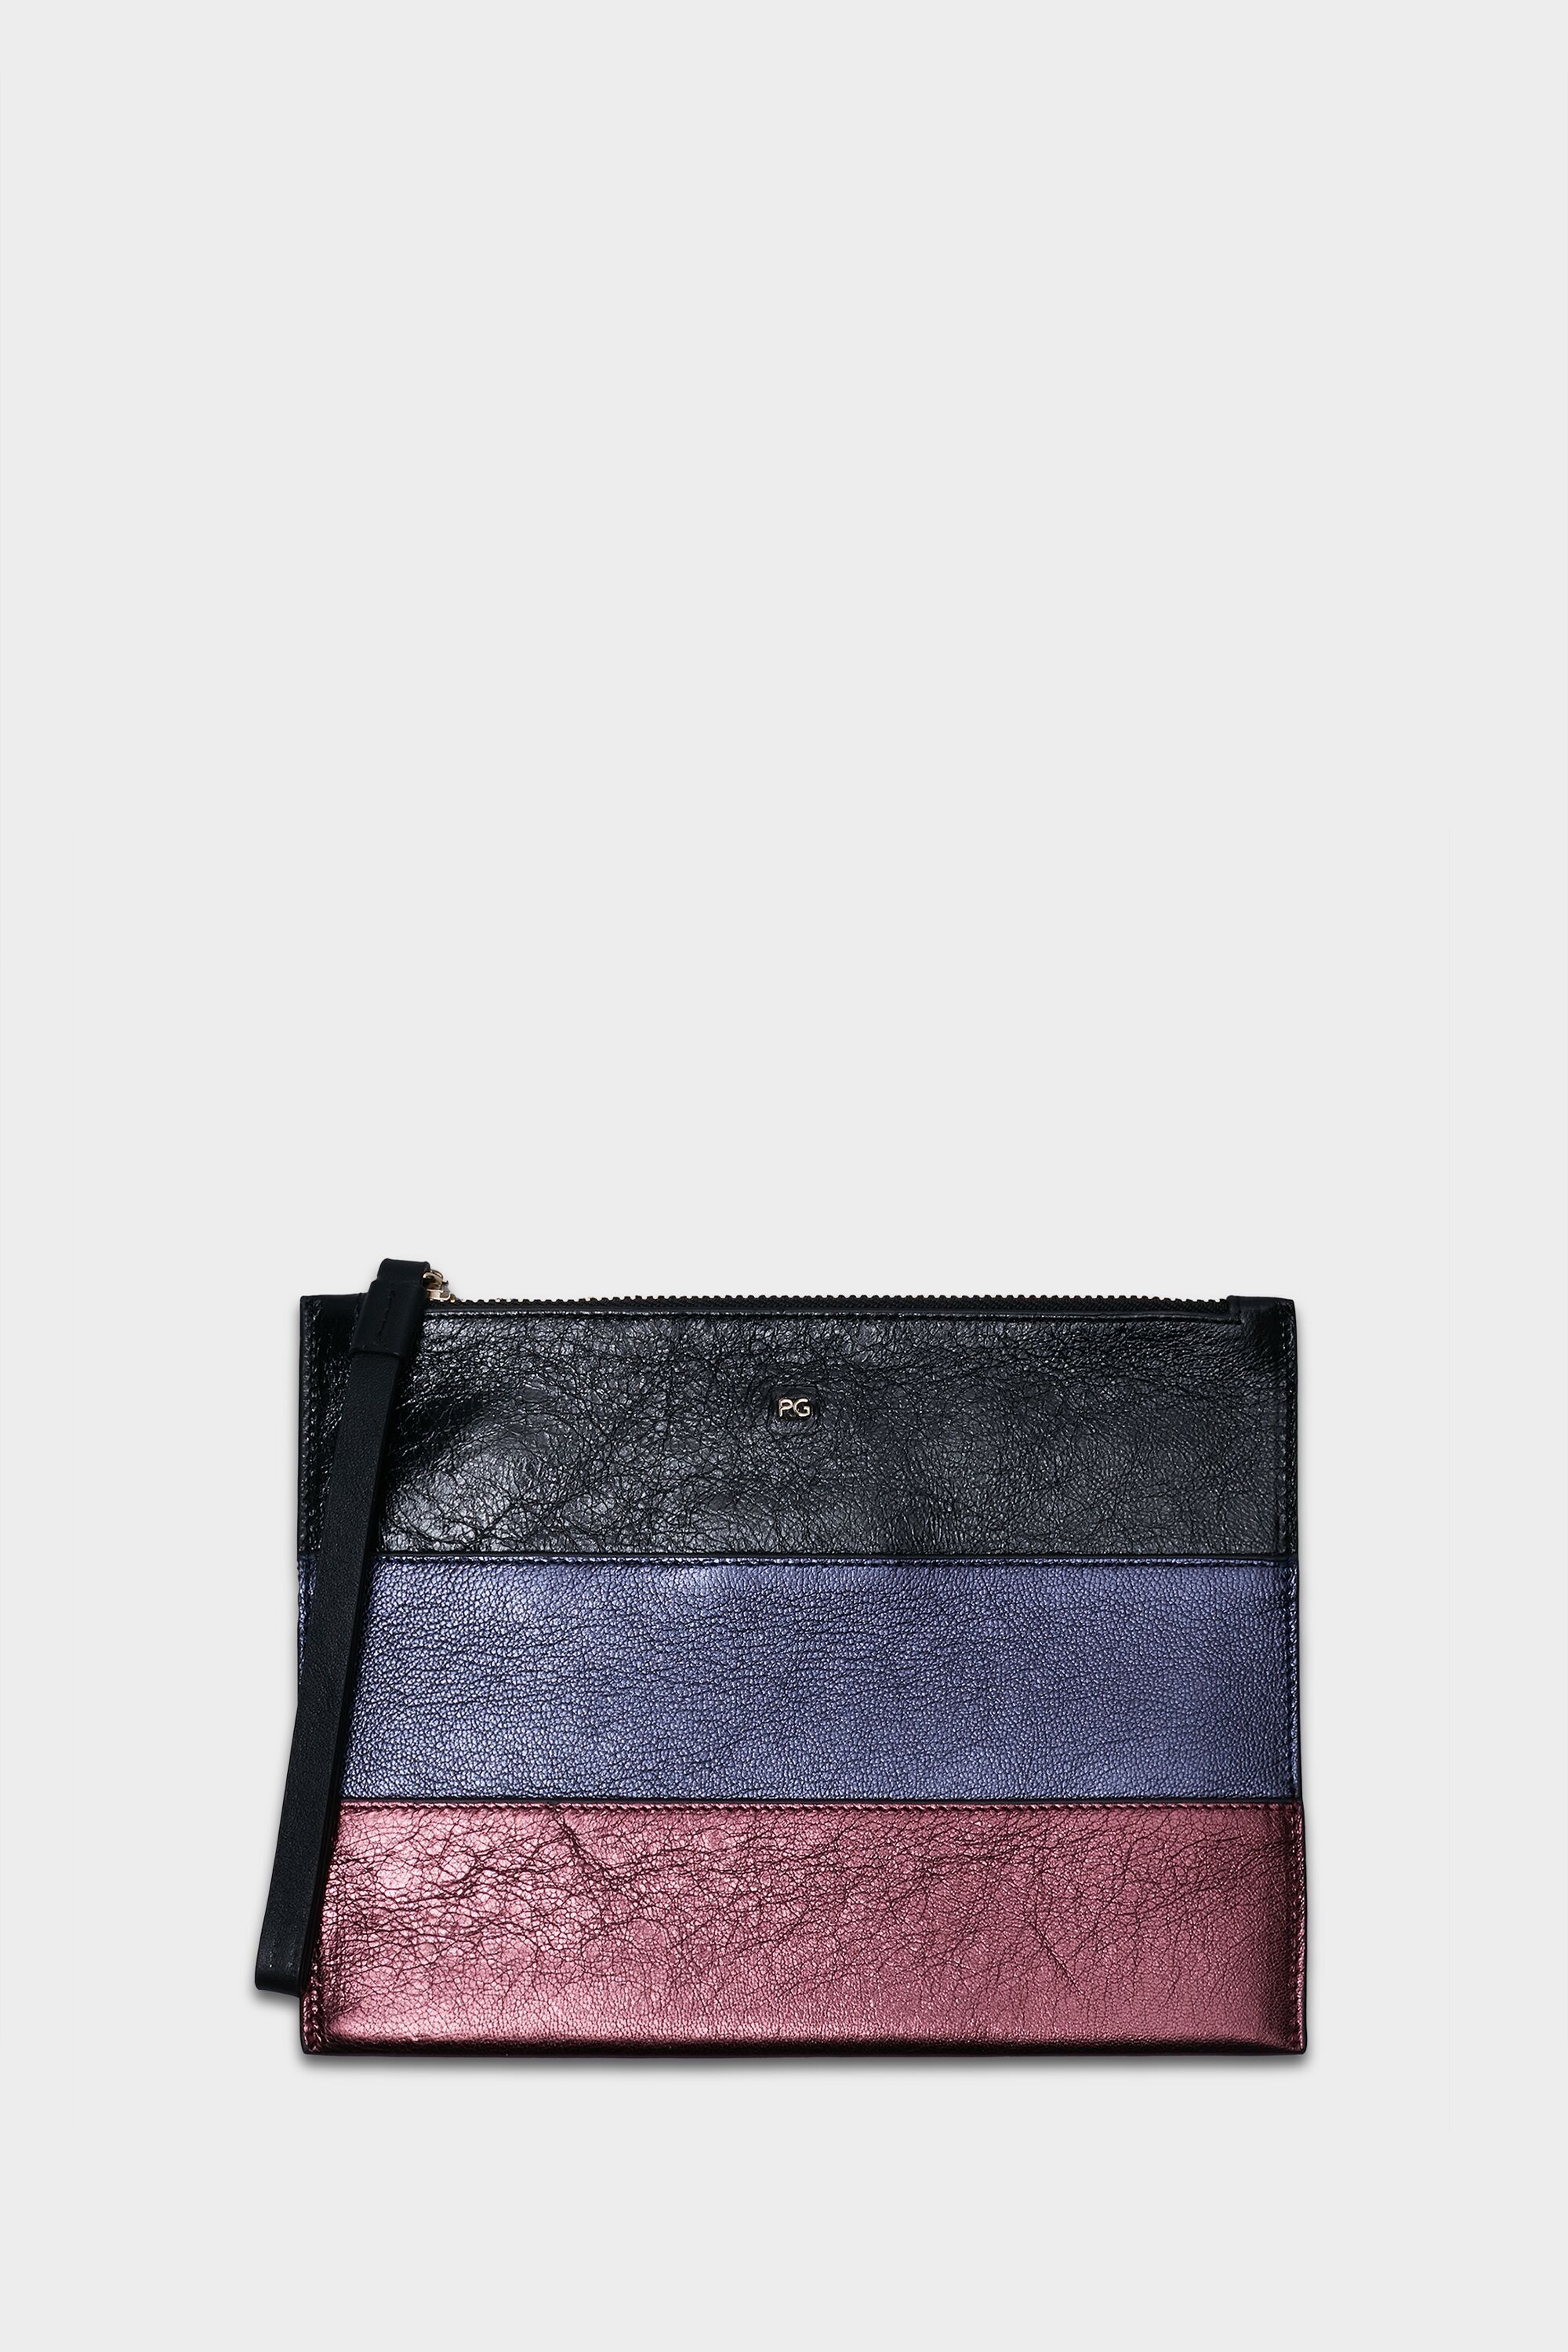 Pouch mediano patchwork